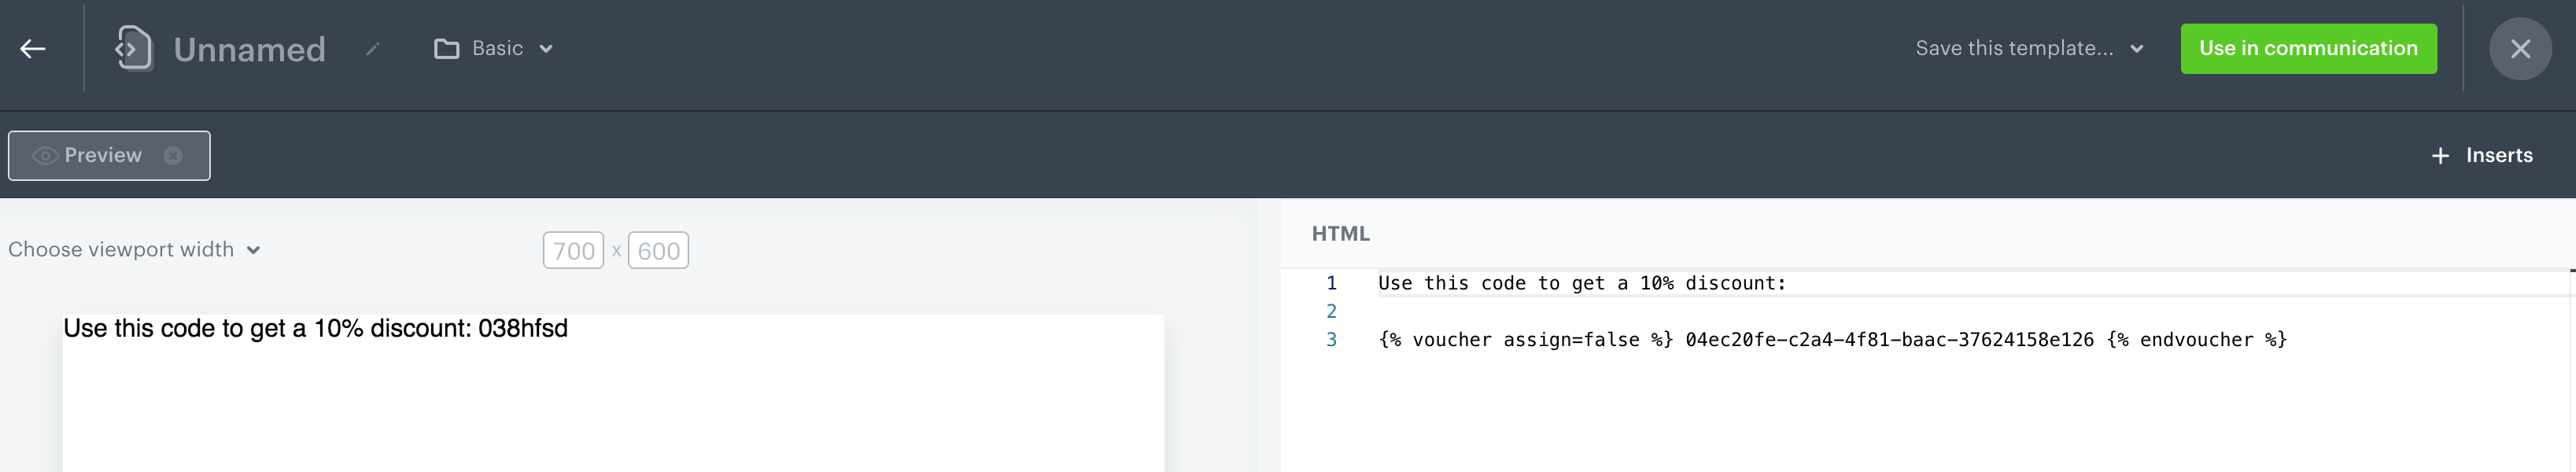 Implementing a discount code in the form of a string in an email